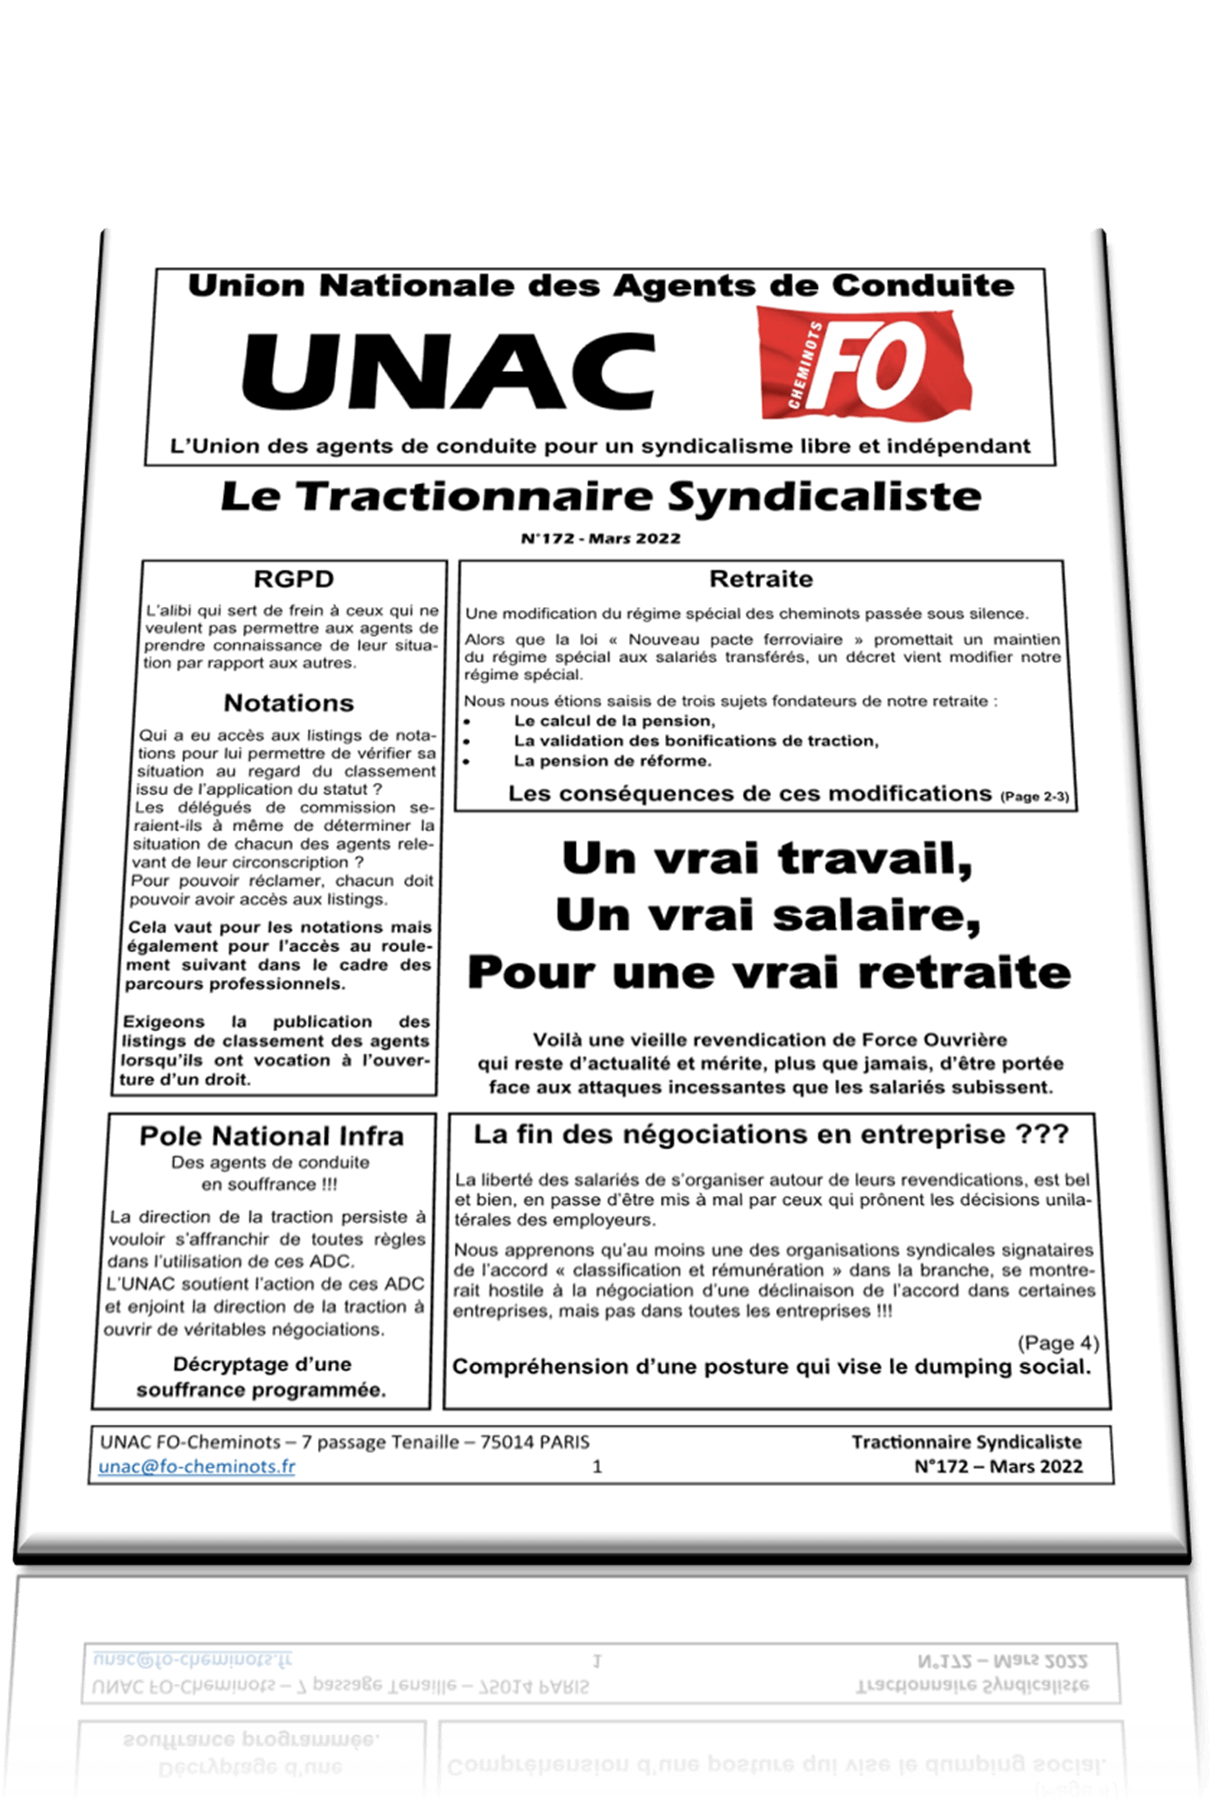 Le Tractionnaire Syndicaliste n°172 – Avril 2022